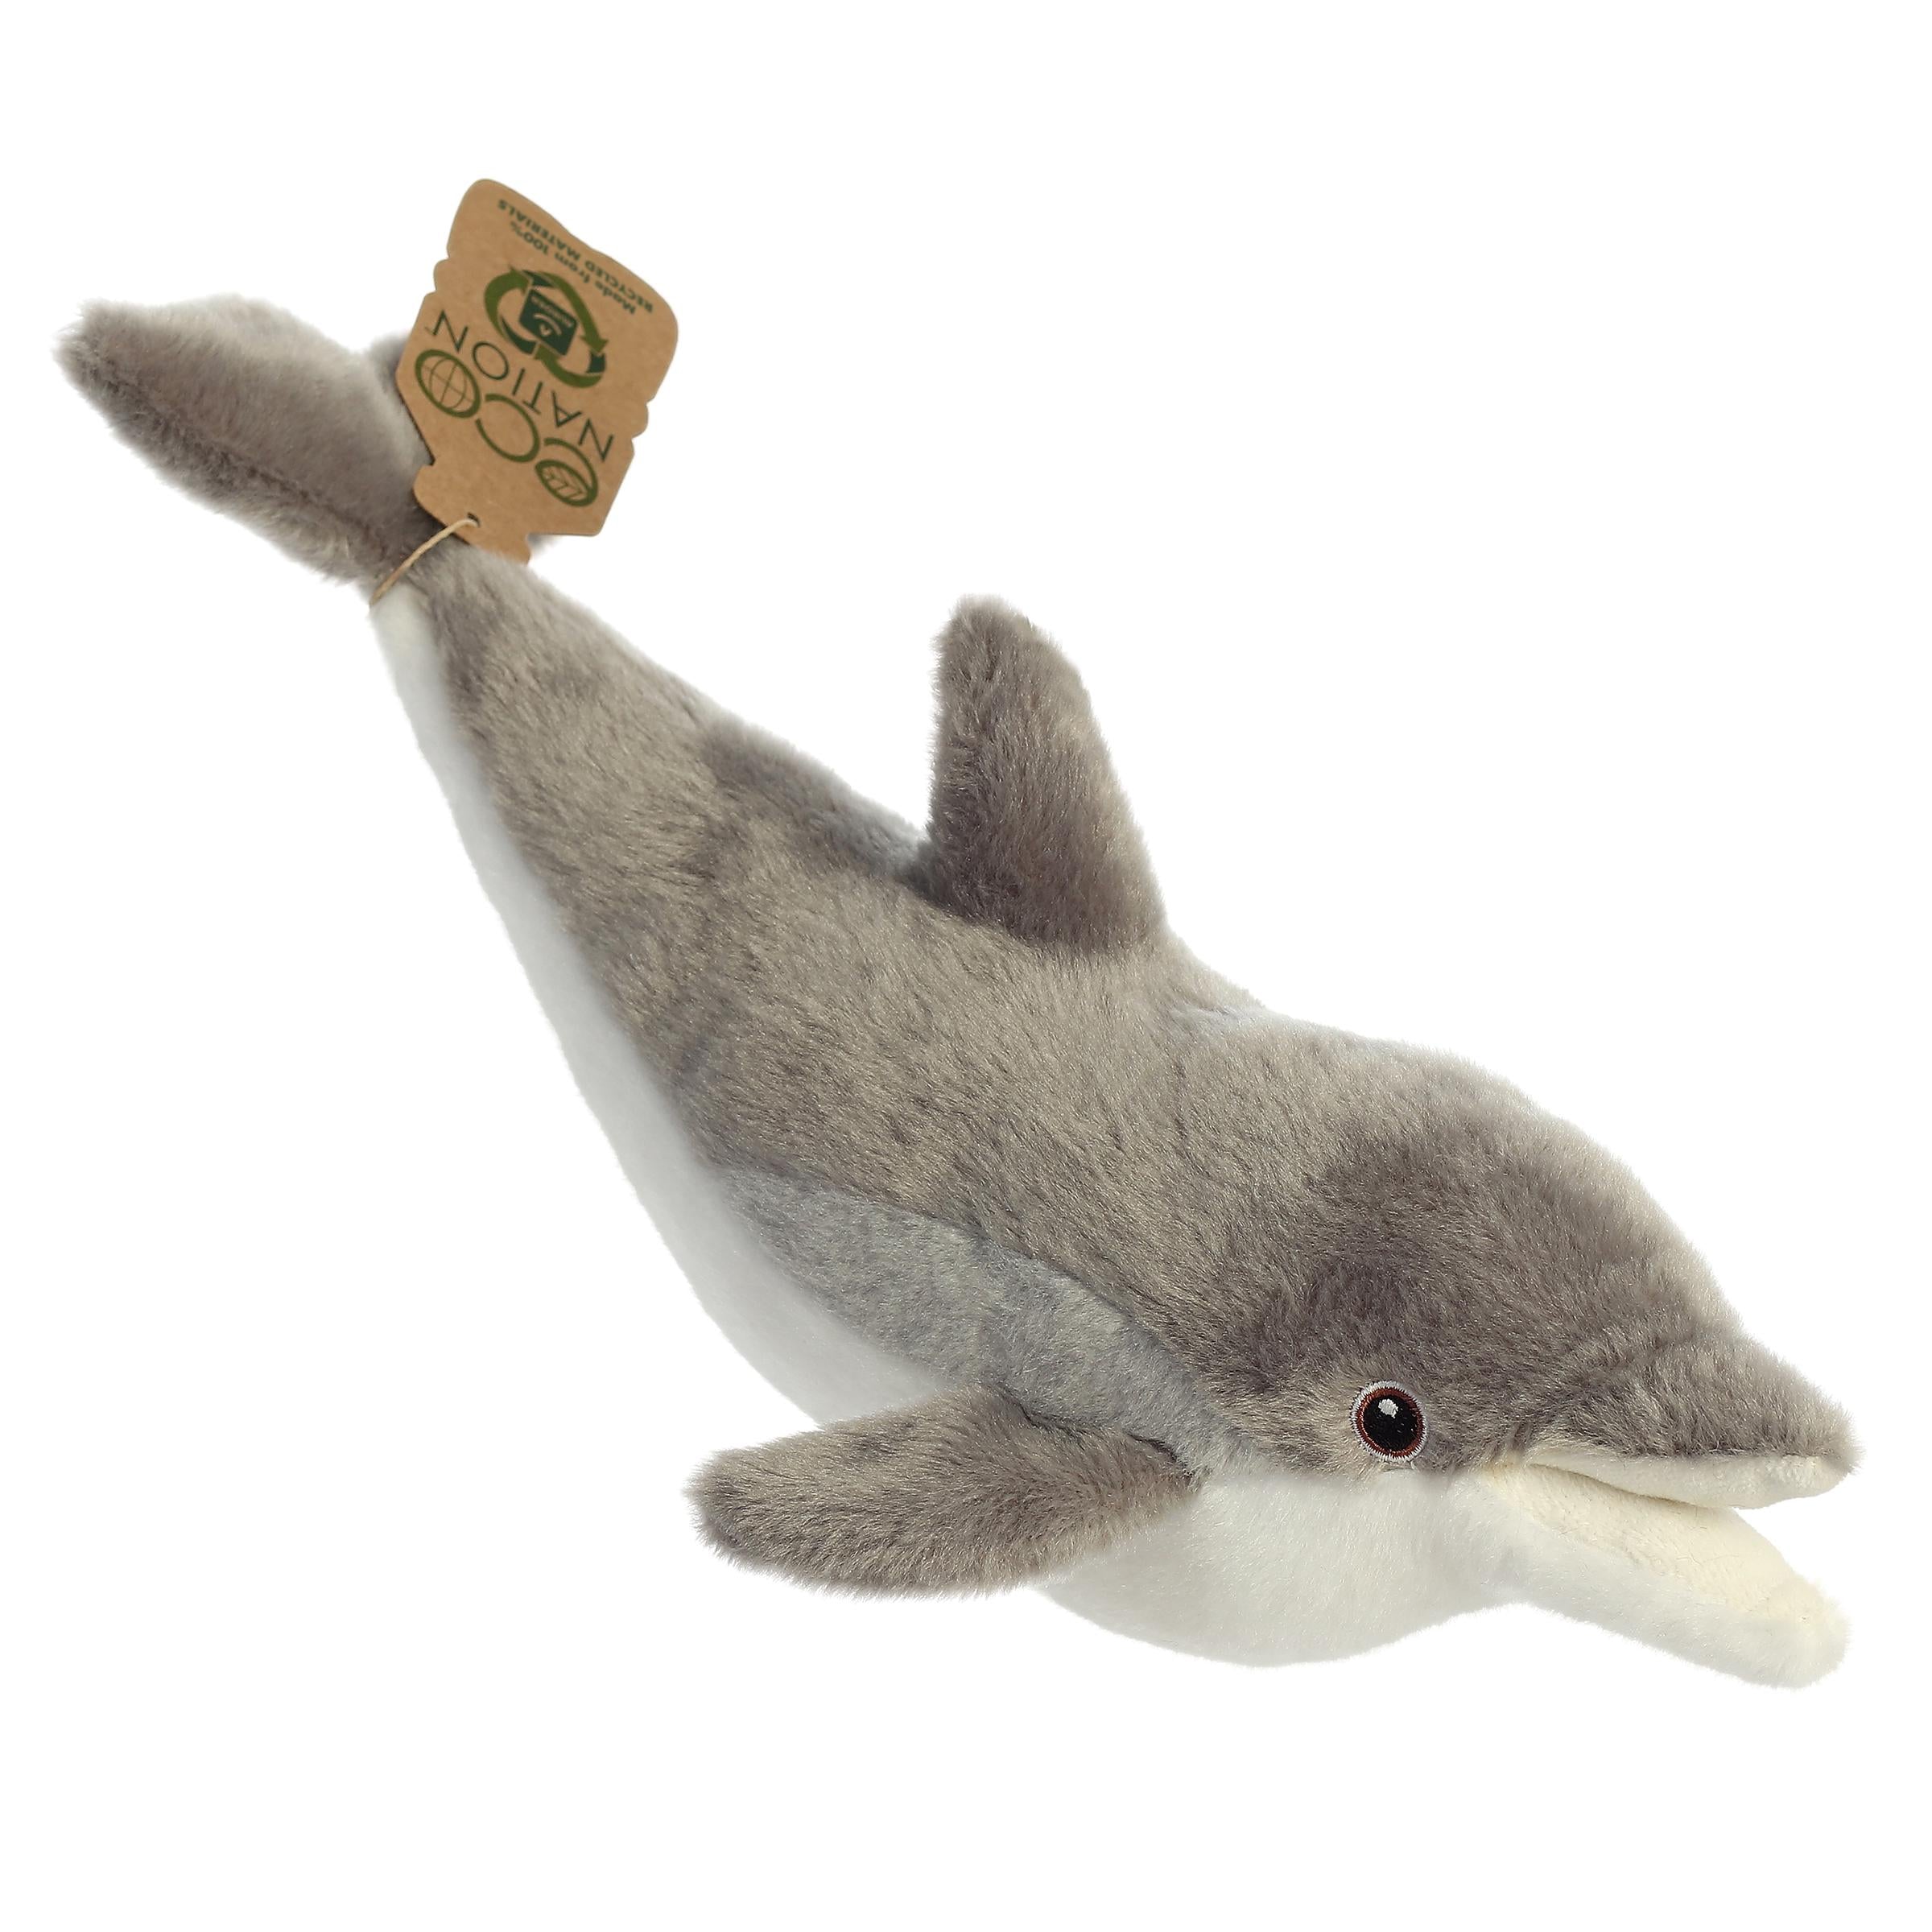 A whimsical dolphin plush with a grey and white coat, gentle embroidered eyes, and an eco-nation tag around its tail